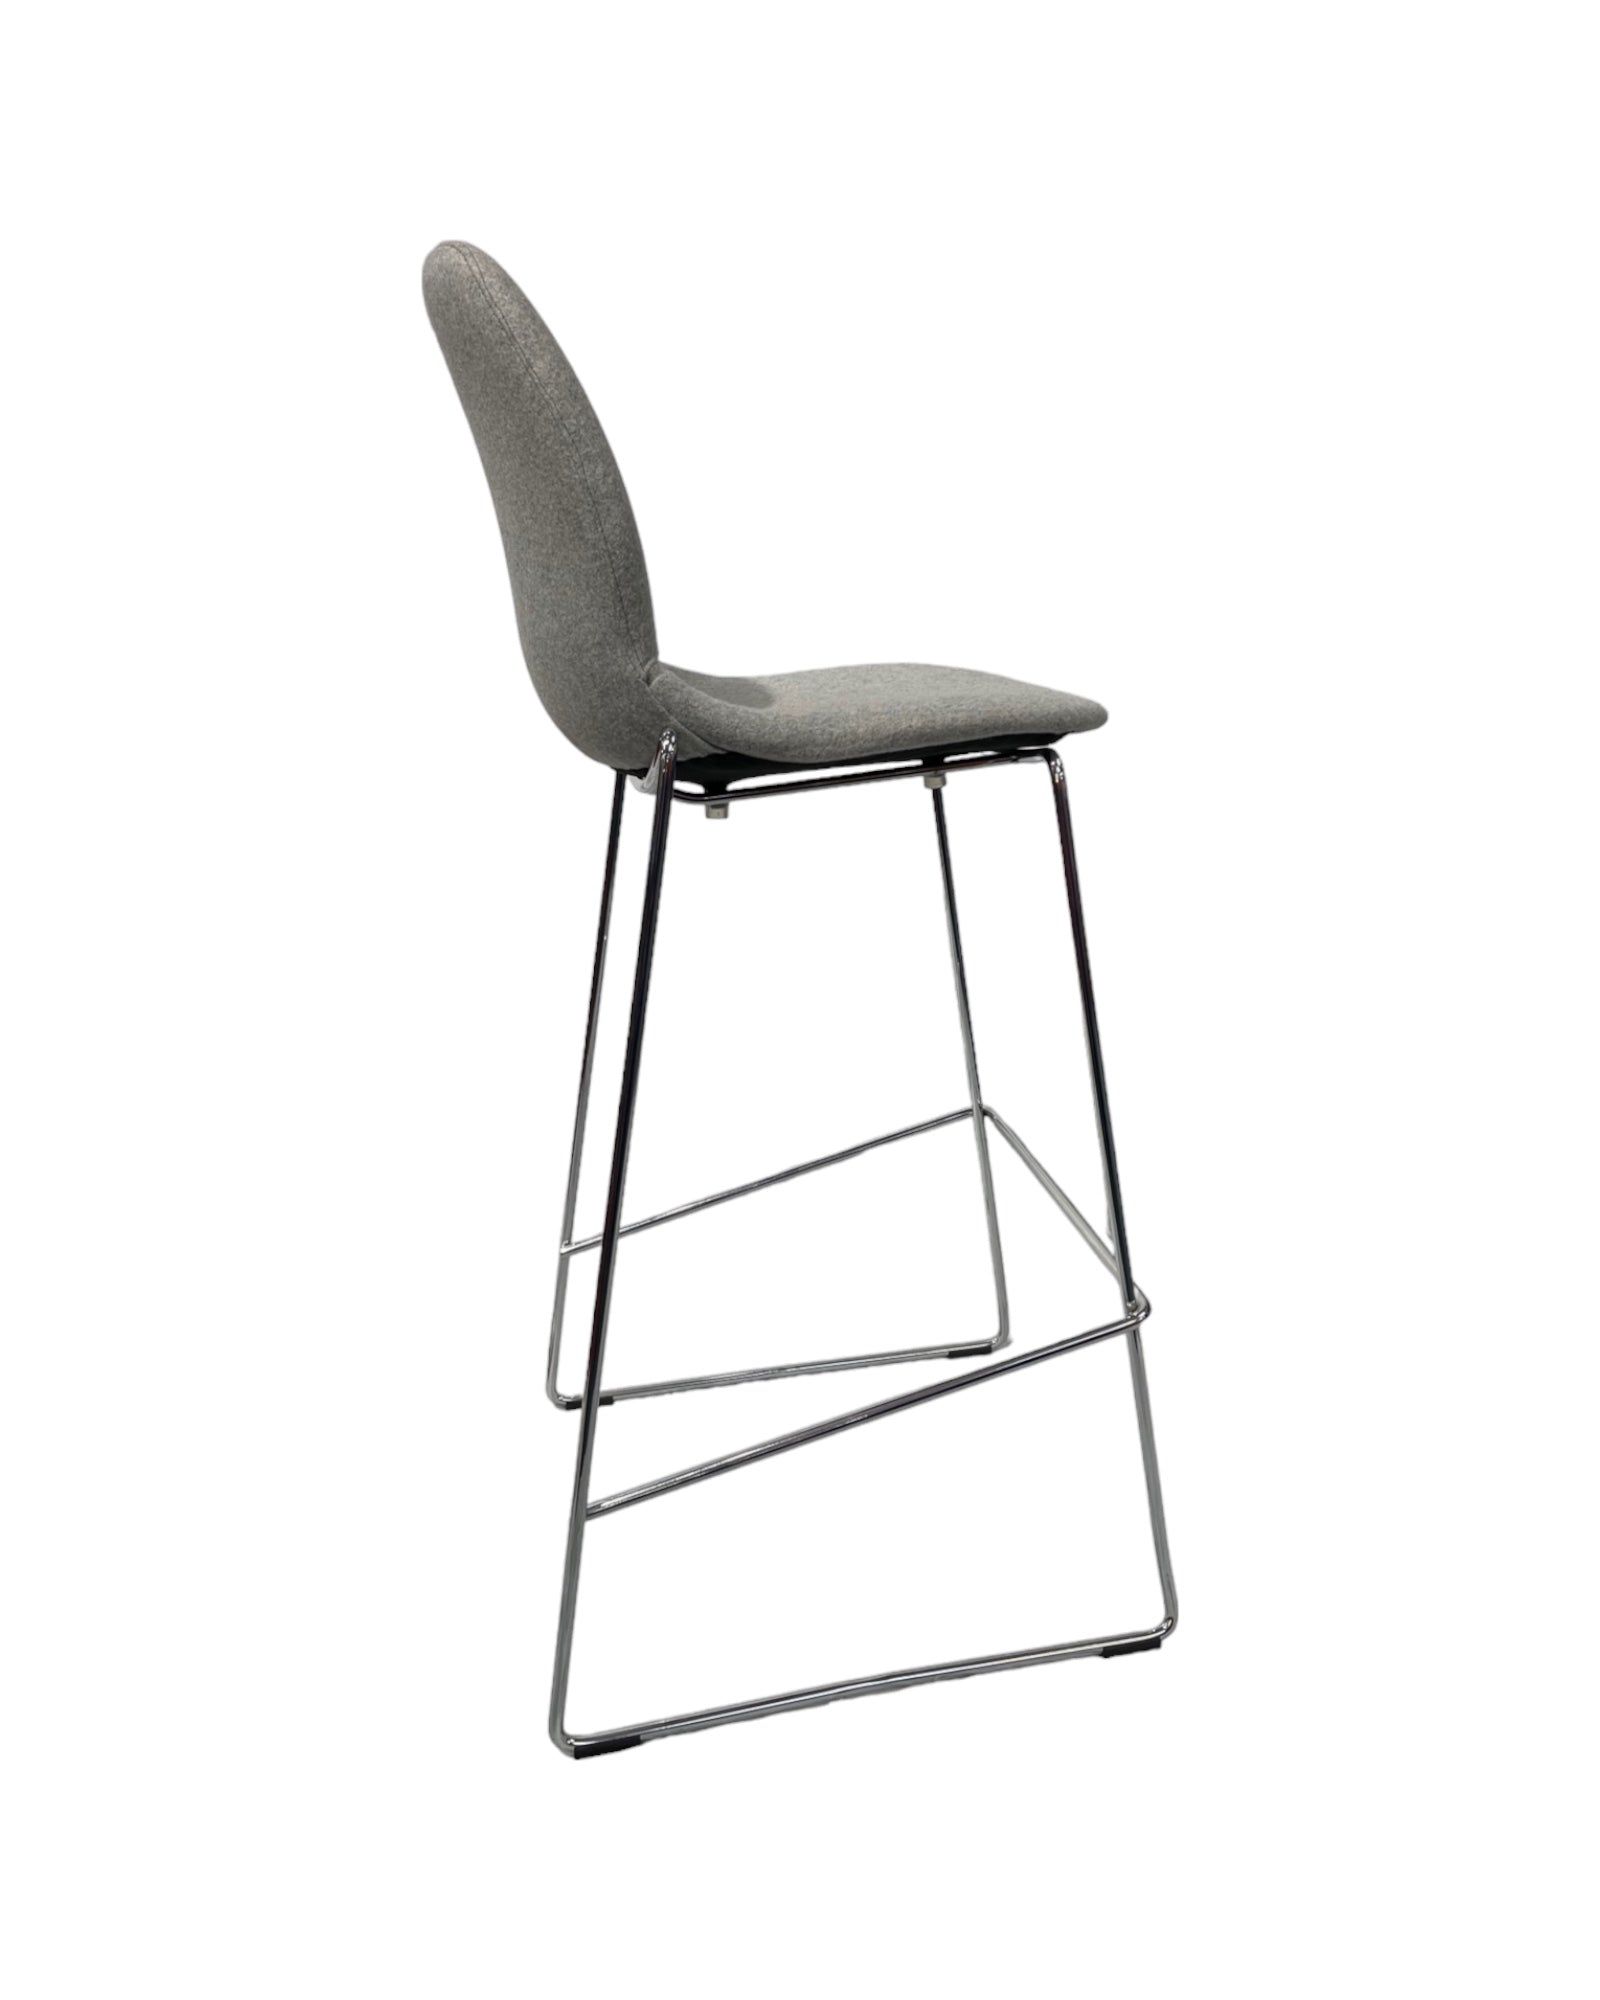 Blend - High Stool with Padded Seat